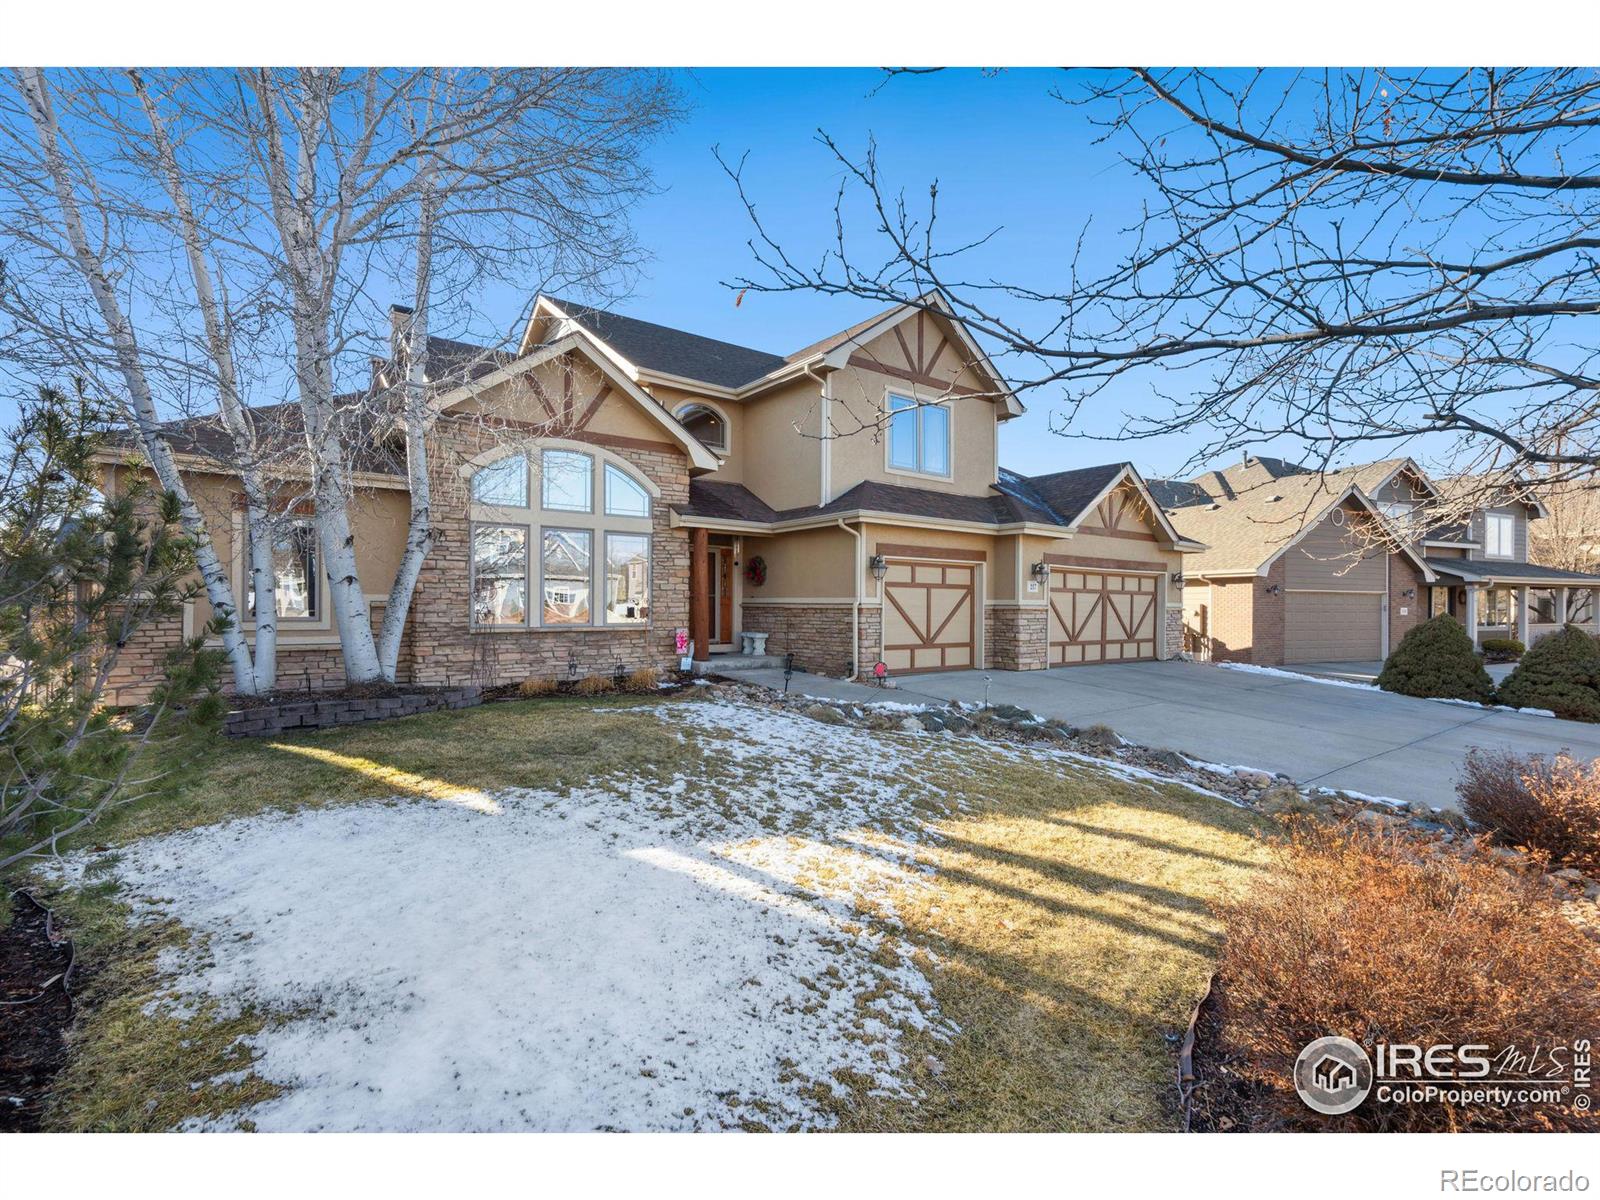 CMA Image for 225 n 53rd ave pl,Greeley, Colorado